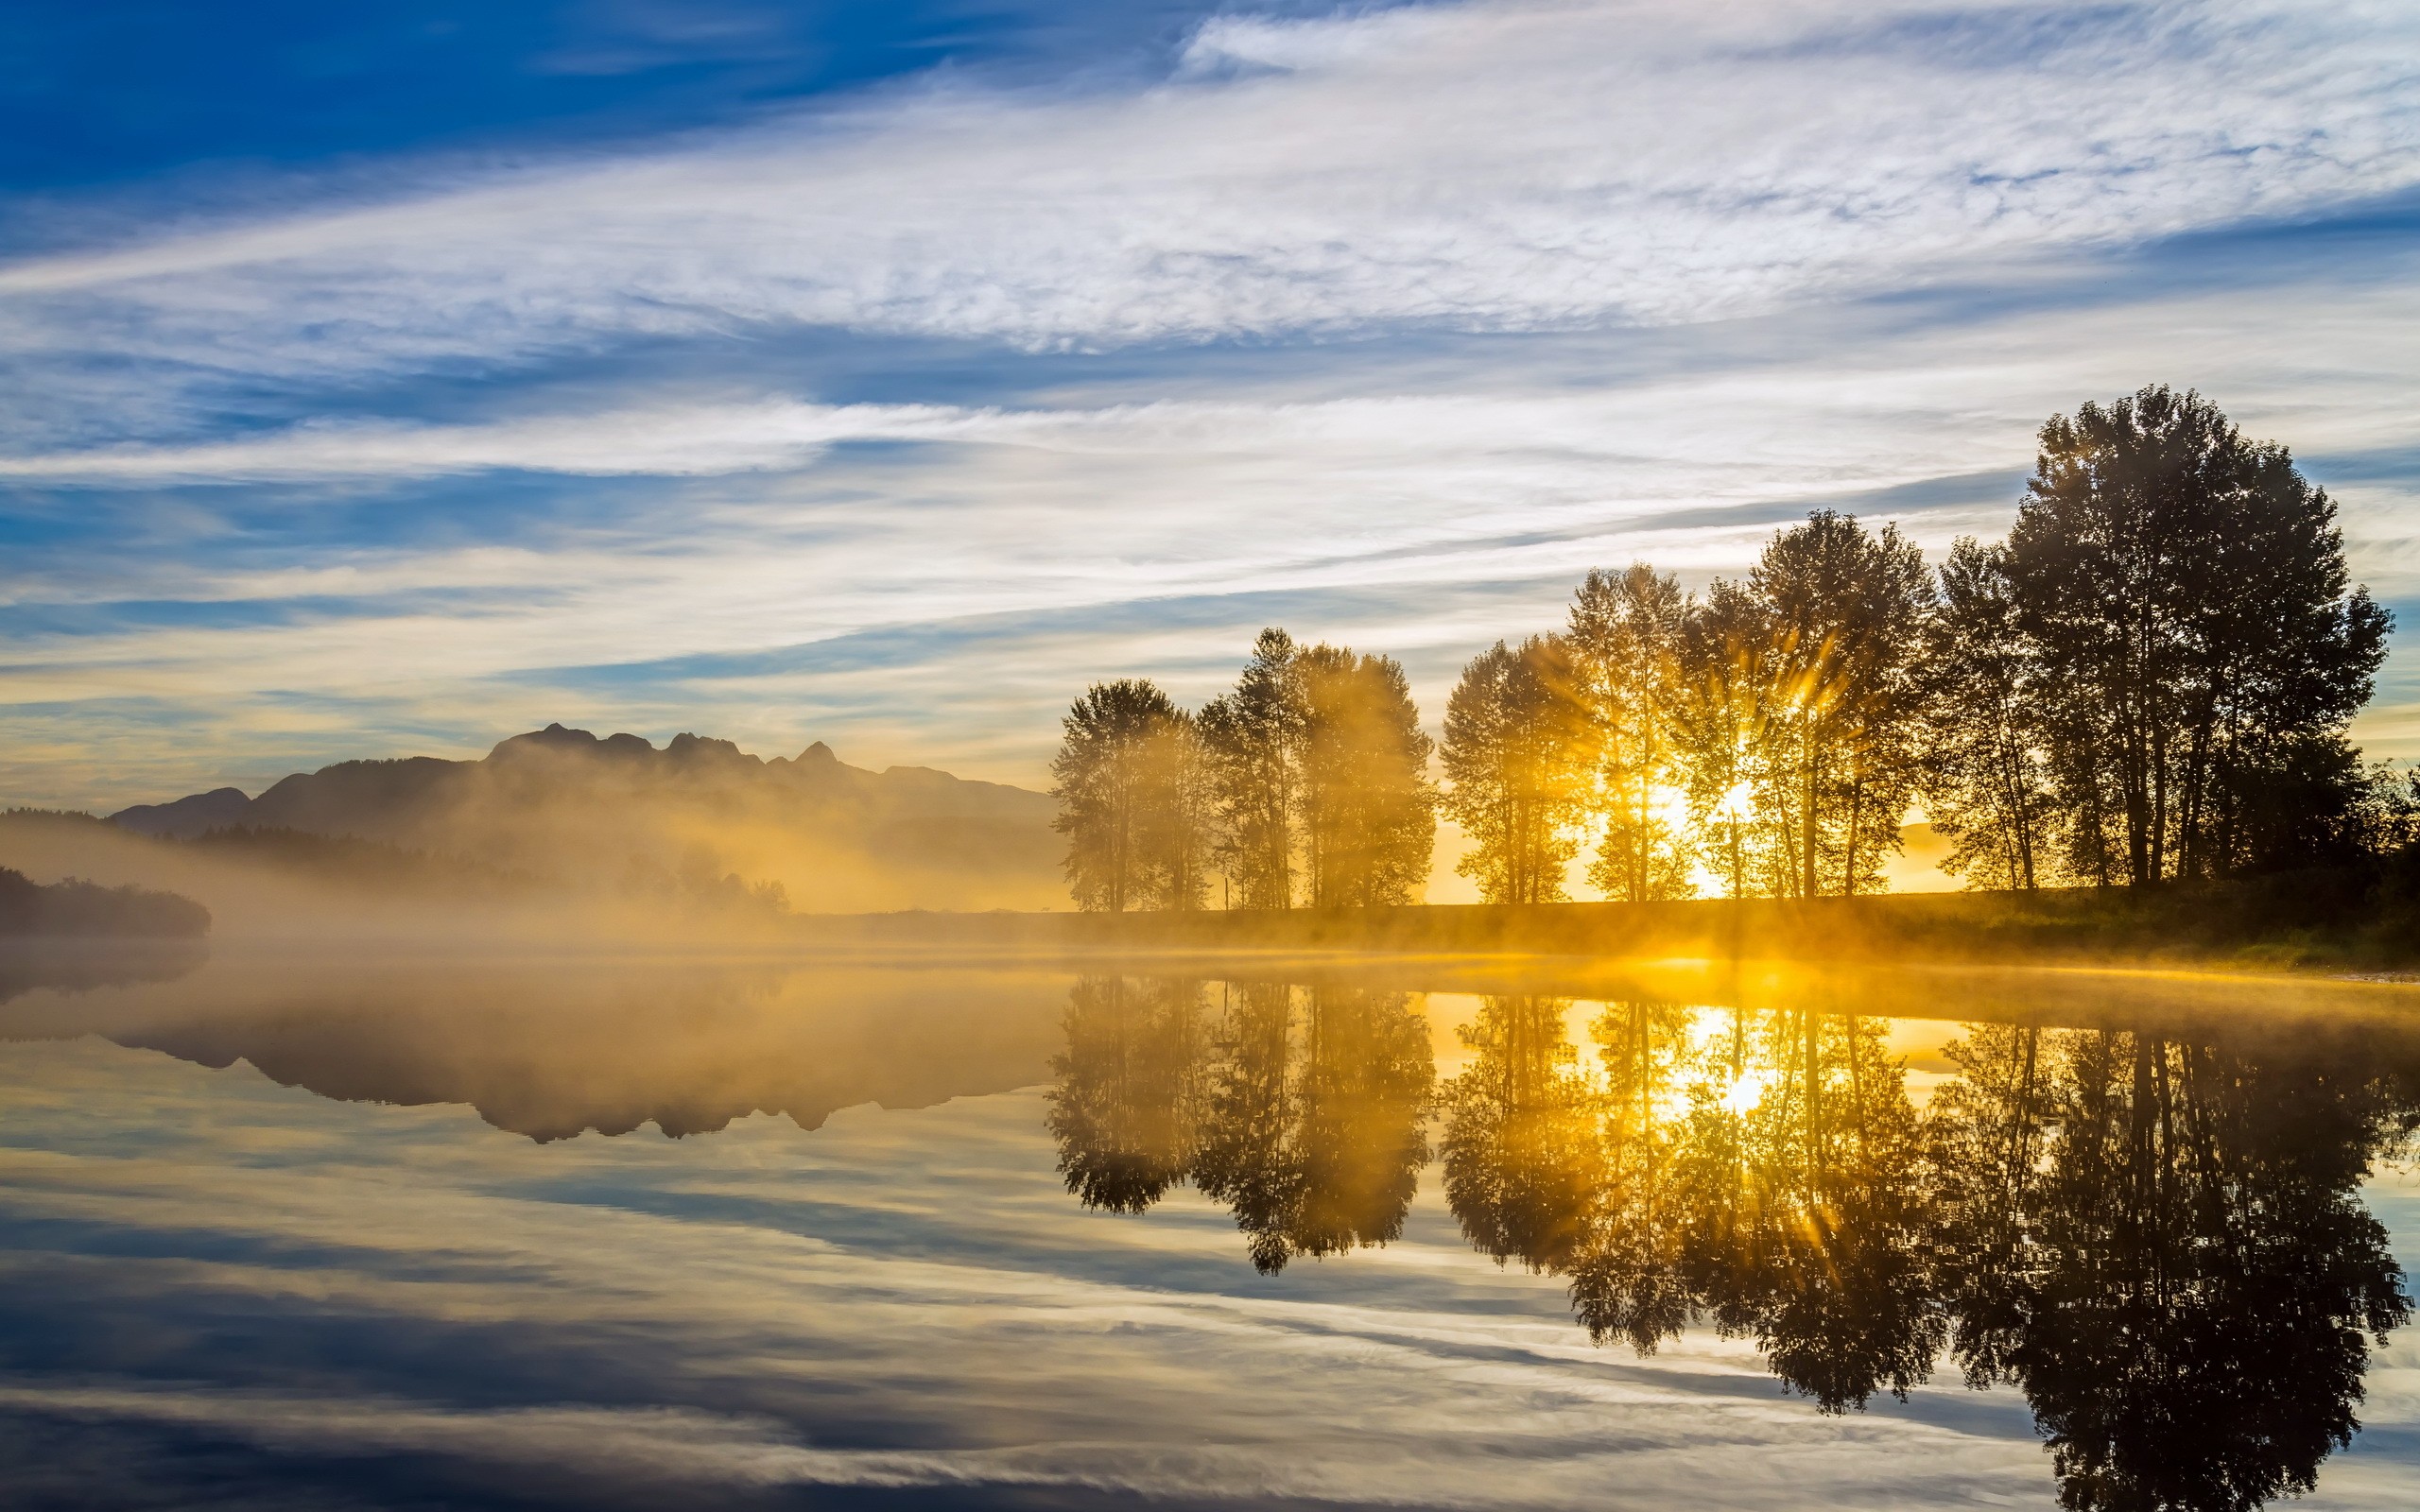 General 2560x1600 river trees mountains water photography mist nature sunlight outdoors reflection sky landscape